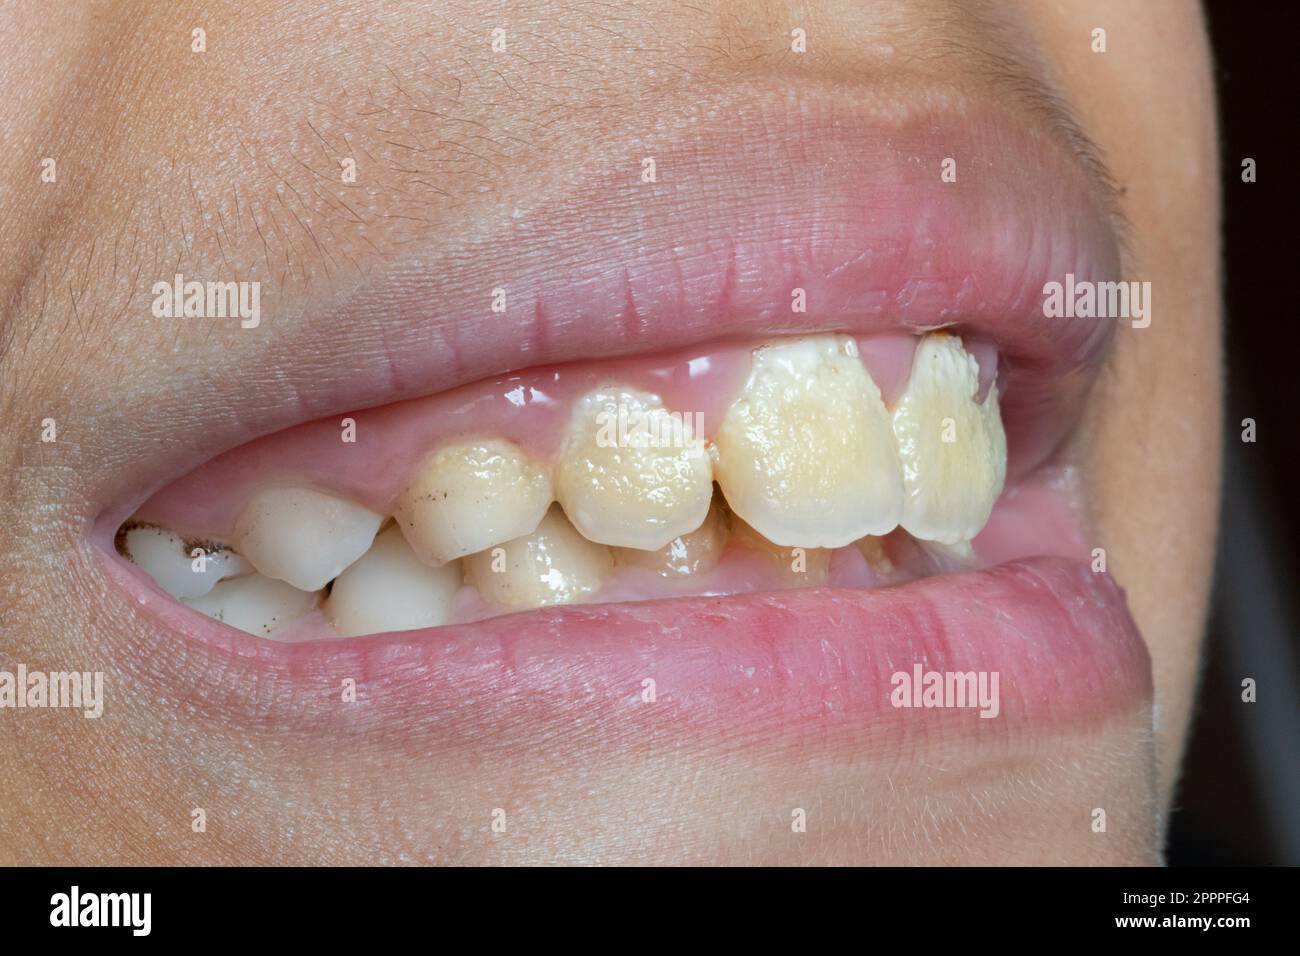 Macro of neglected baby teeth, with plaque and tartar and black fungus. Condition of poor oral hygiene with risk of bacterial infection. Stock Photo